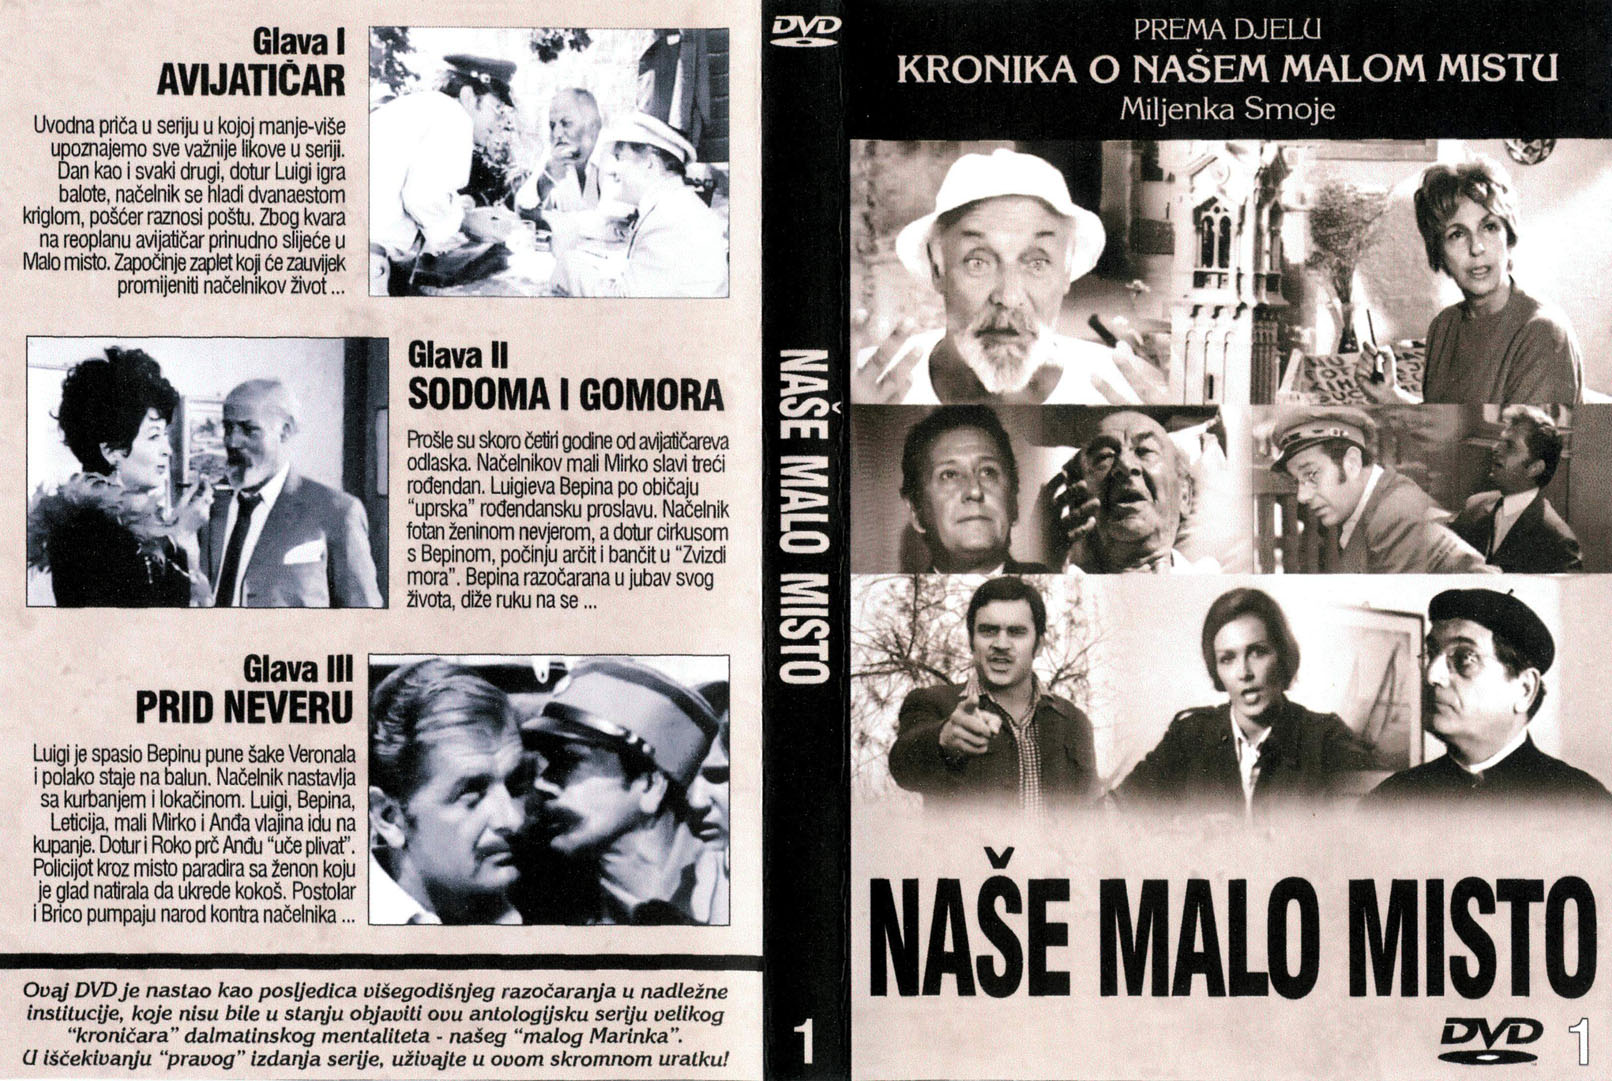 Click to view full size image -  DVD Cover - N - nase_malo_misto_1_dvd - nase_malo_misto_1_dvd.jpg